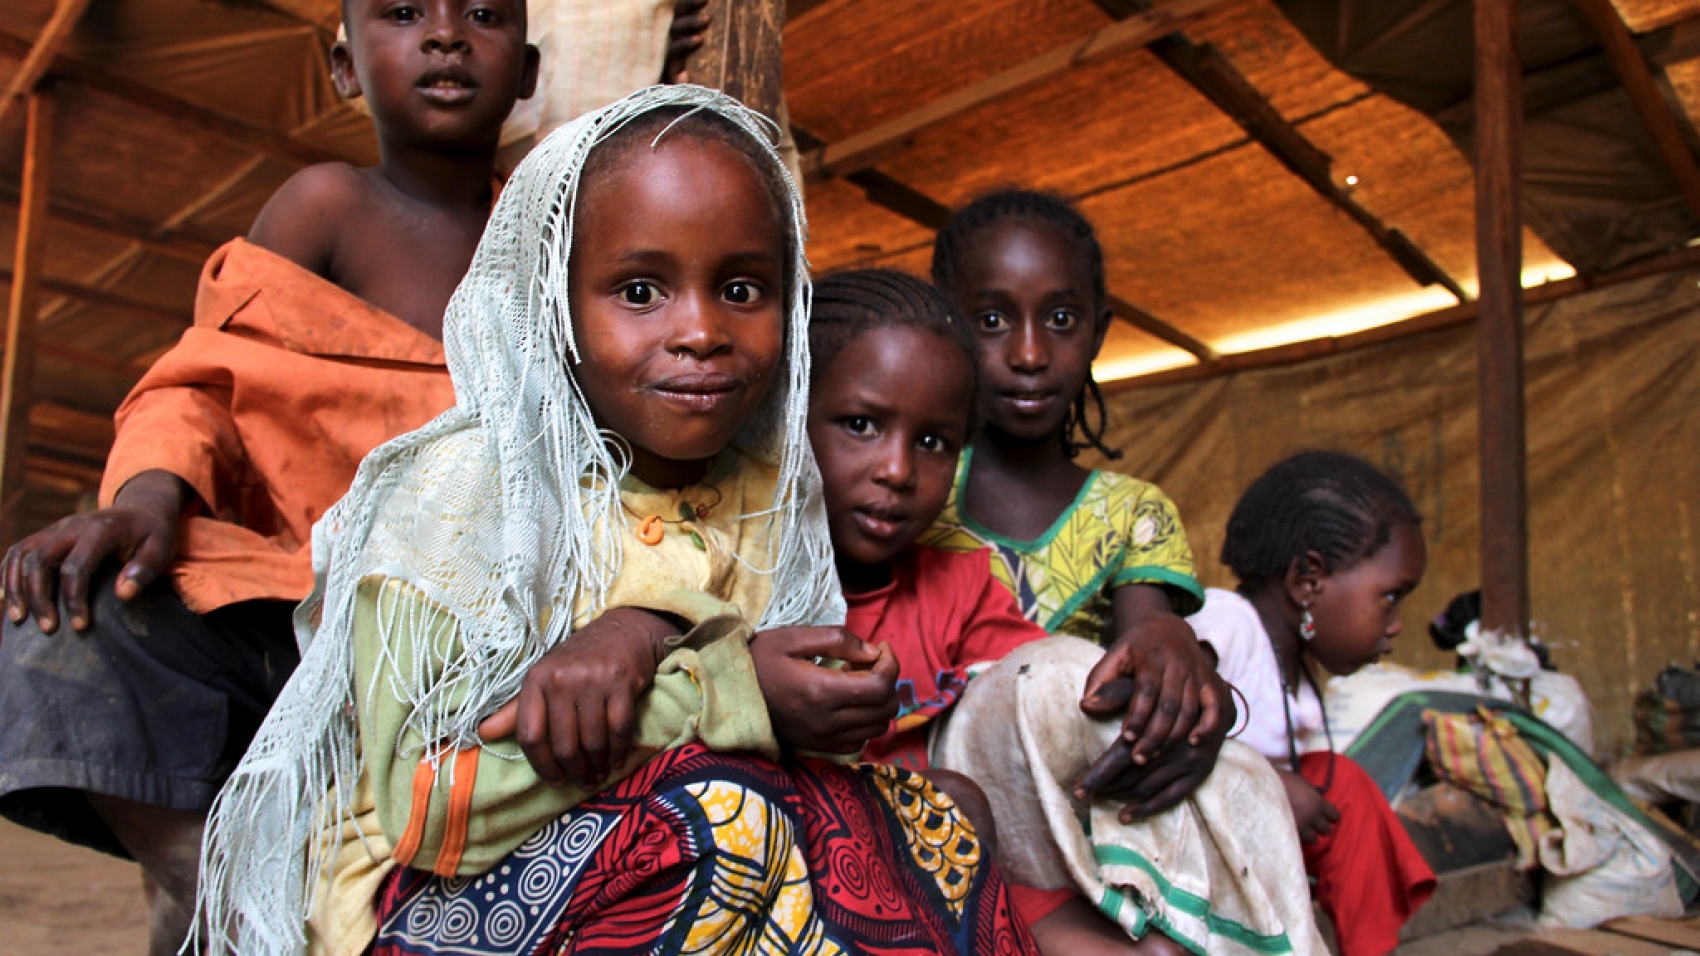 "Gara Boulai, eastern Cameroon, 16 April 2015: Children at the transit camp in Gara Boulai. Their families have come to register as refugees. Many have already spent several months in Cameroon staying in the bush or with host families, but now need assistance. Credit: OCHA/Ivo Brandau"